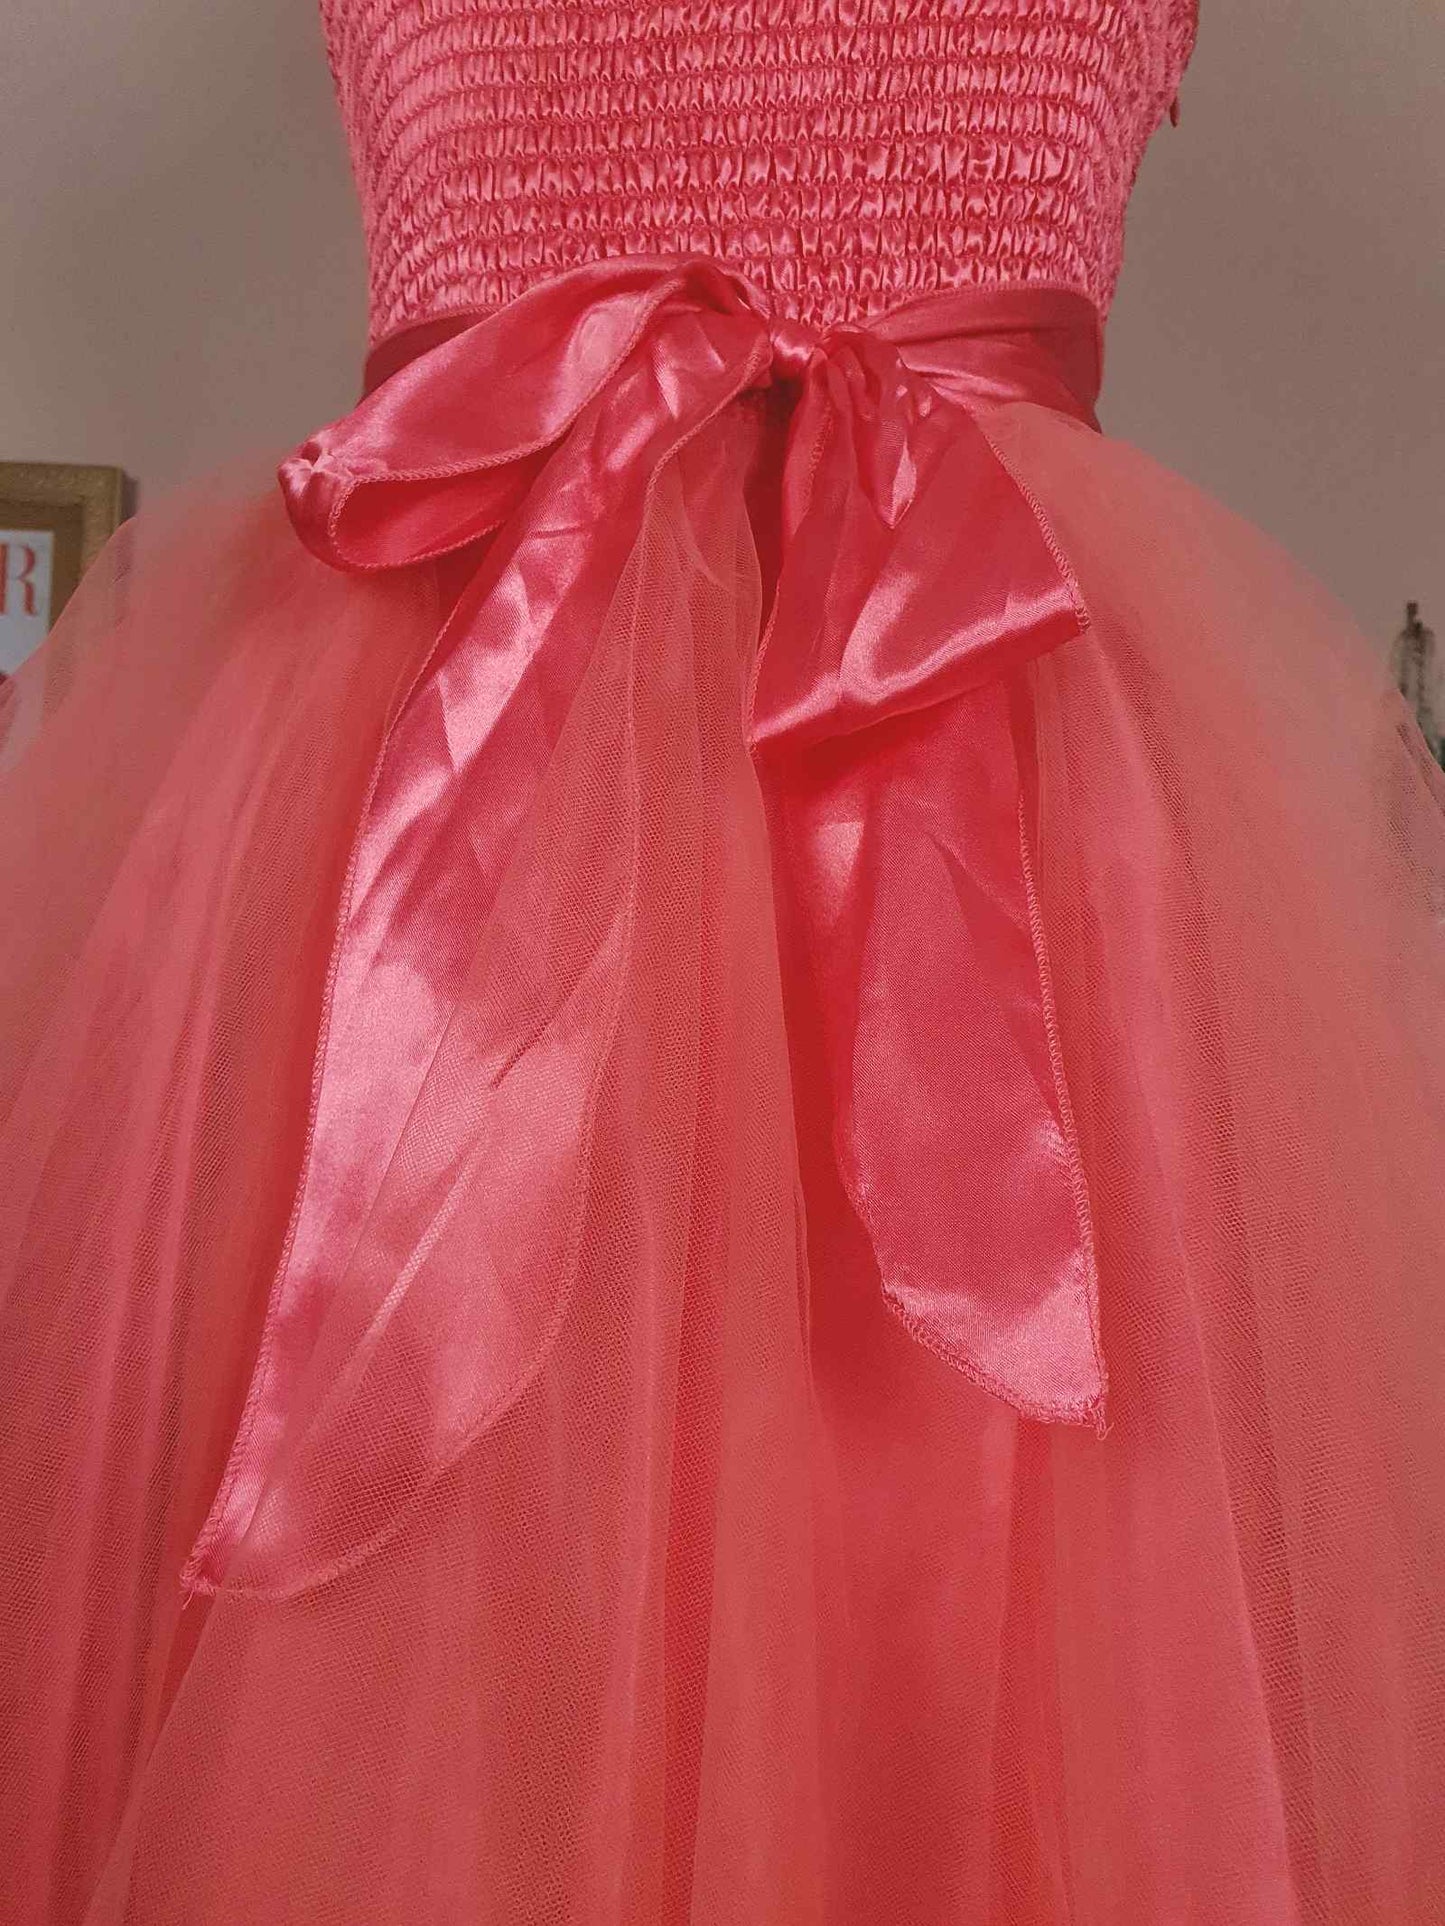 Vintage Peach Satin & Tulle Party Dress Ball Gown Y2K Prom Fit & Flare Size 8